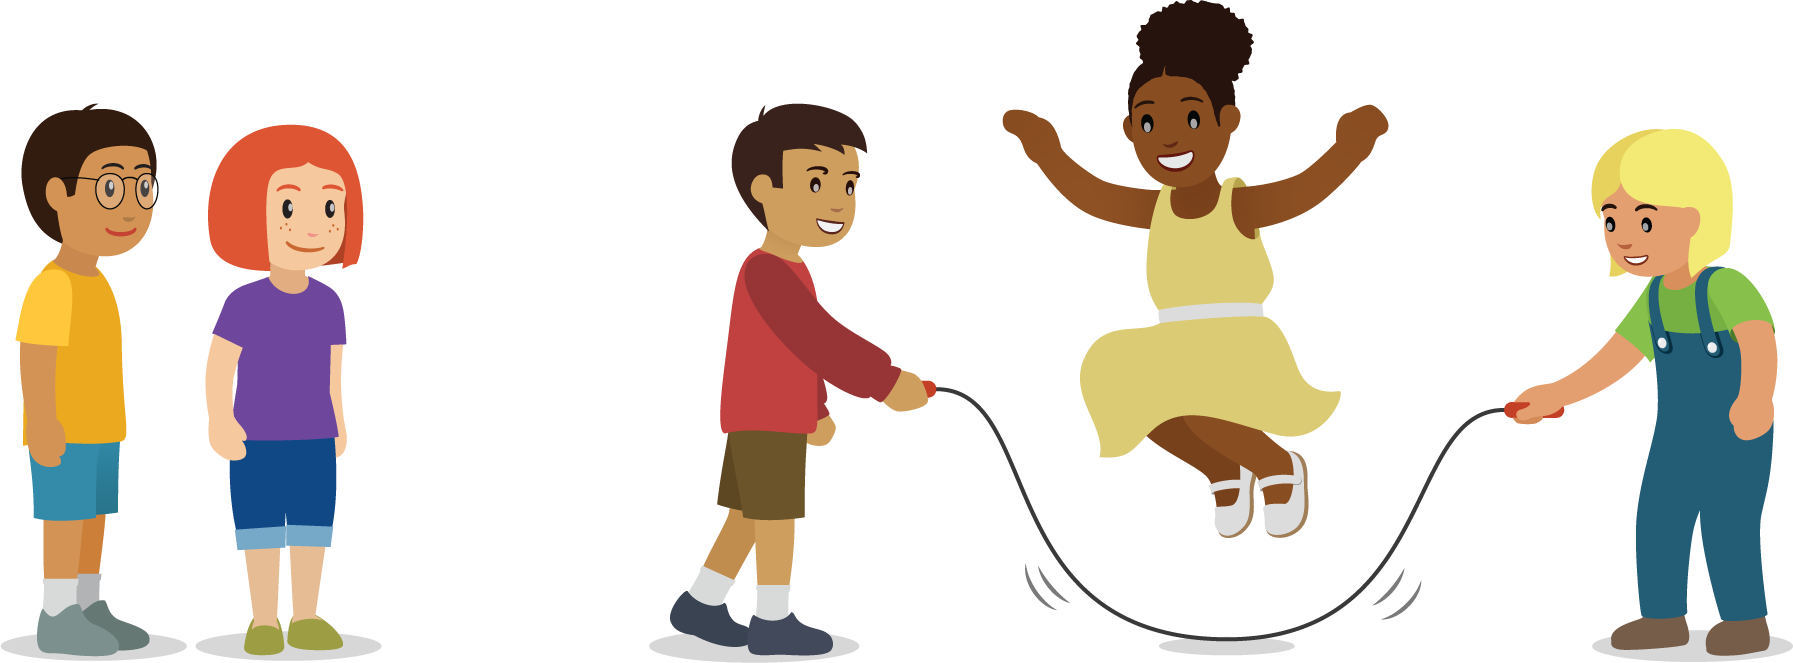 Children jumping rope. Children waiting for a turn.